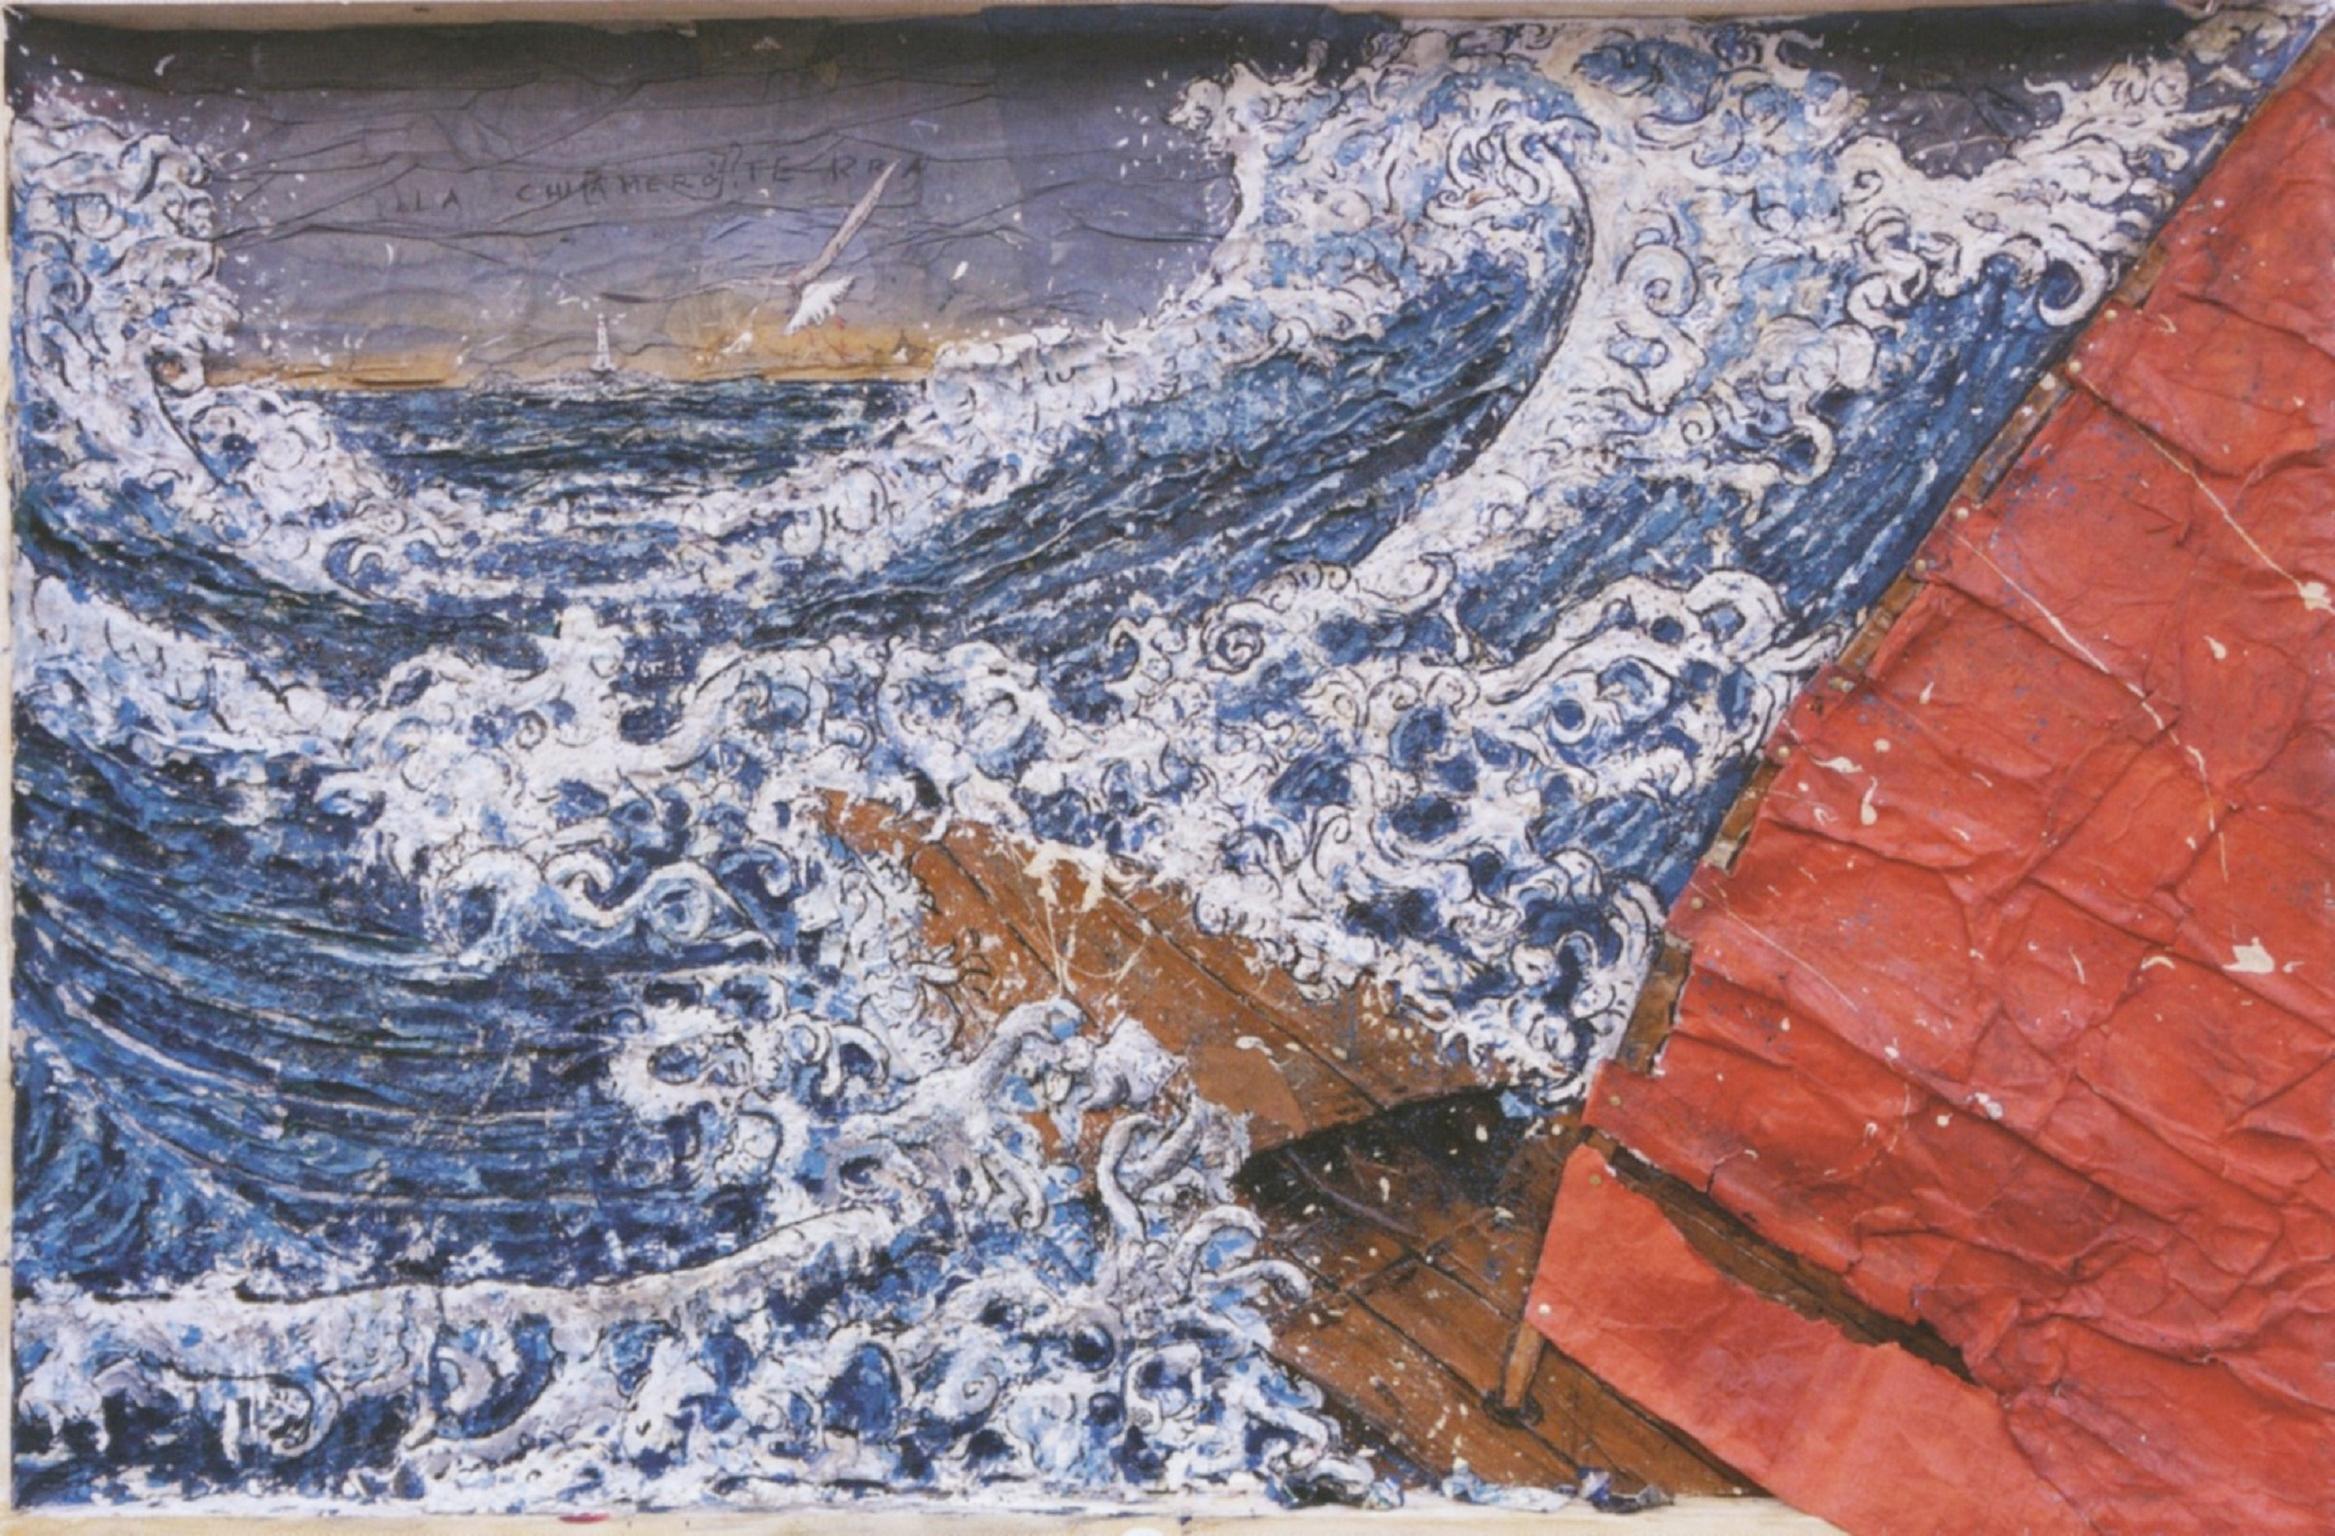 I will call it land (There I will love you), Italian contemporary school_Collage

Collage on Board
125 x 185 cm

In this picture Franzoso represents a wooden boat with a red sail that fights between high and frothy sea waves, waves that are